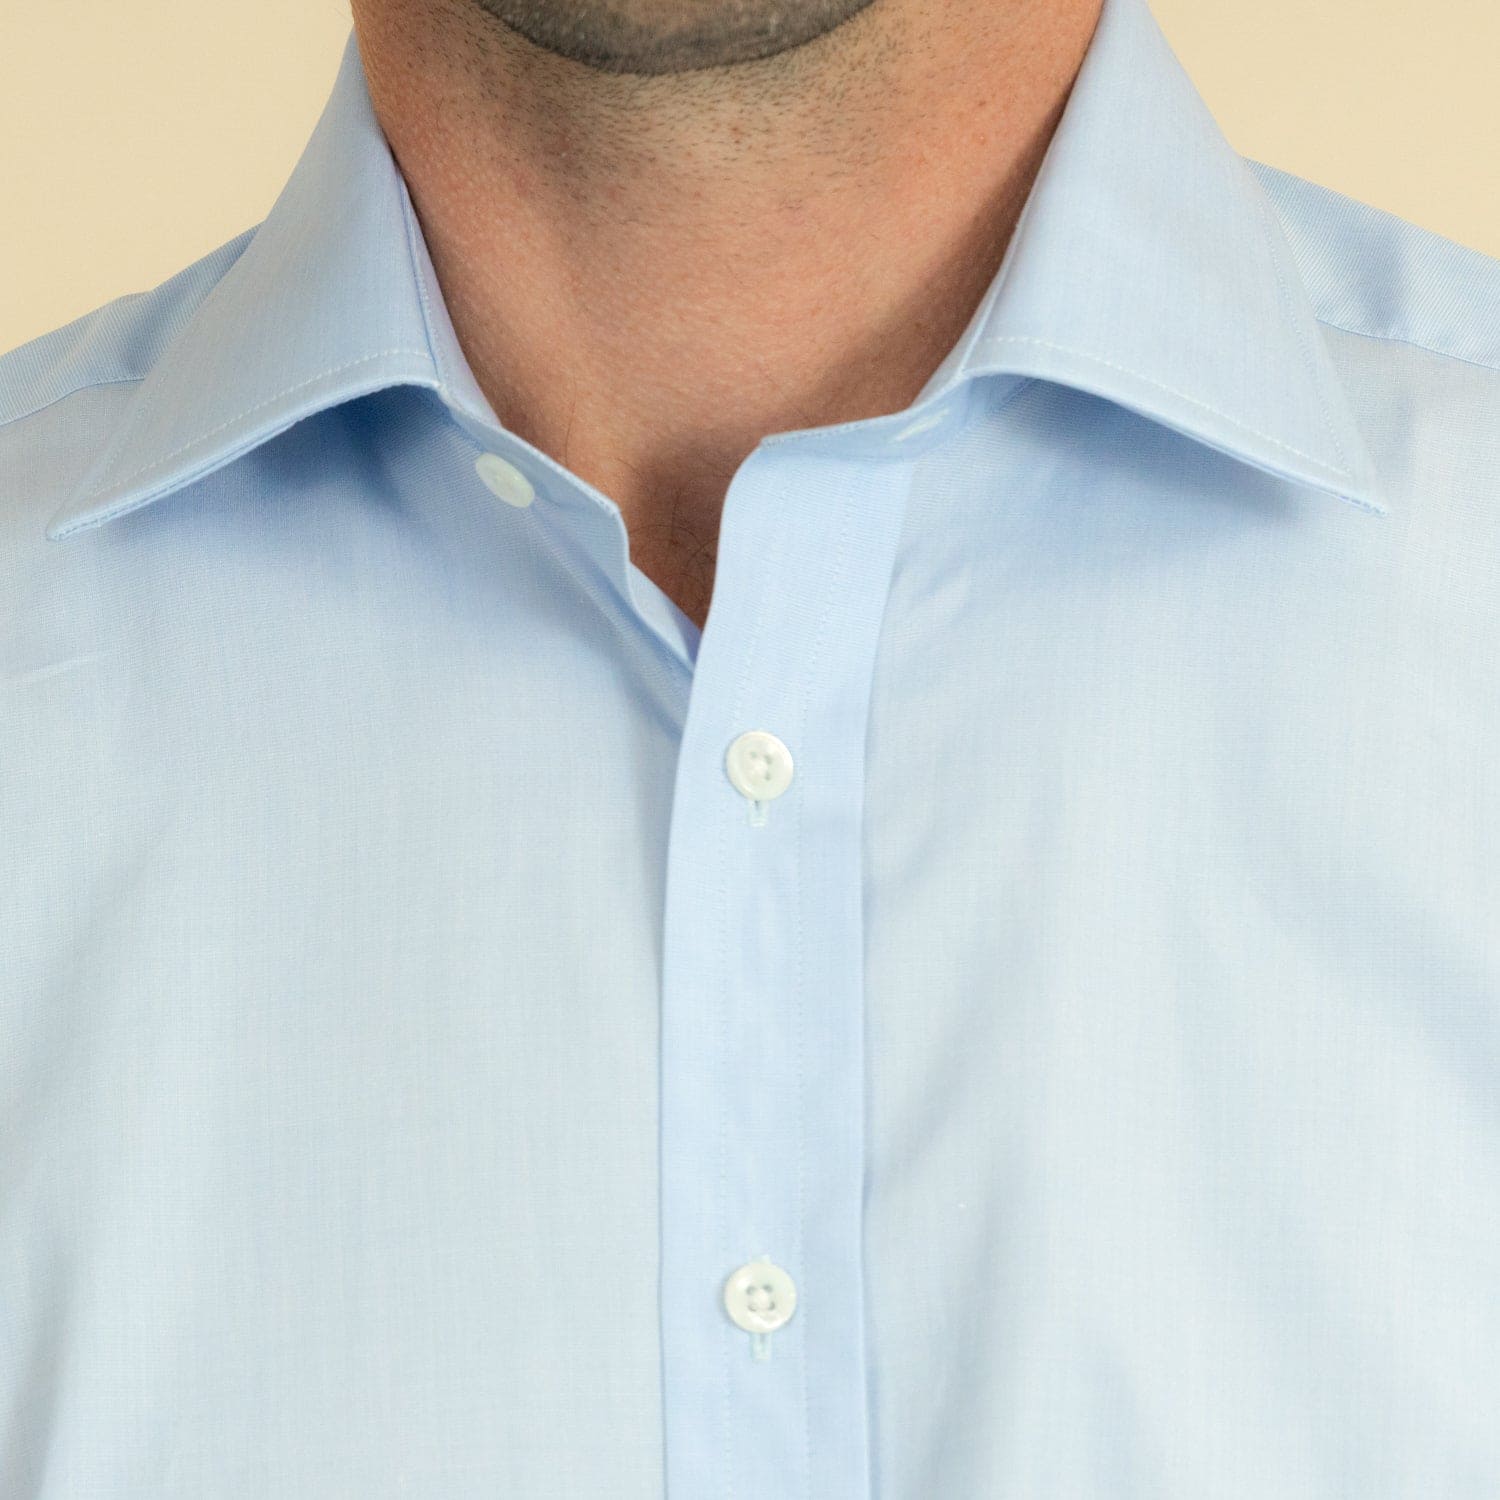 Classic Fit, Classic Collar, Double Cuff Shirt in a Plain Sky Blue End-On-End Cotton